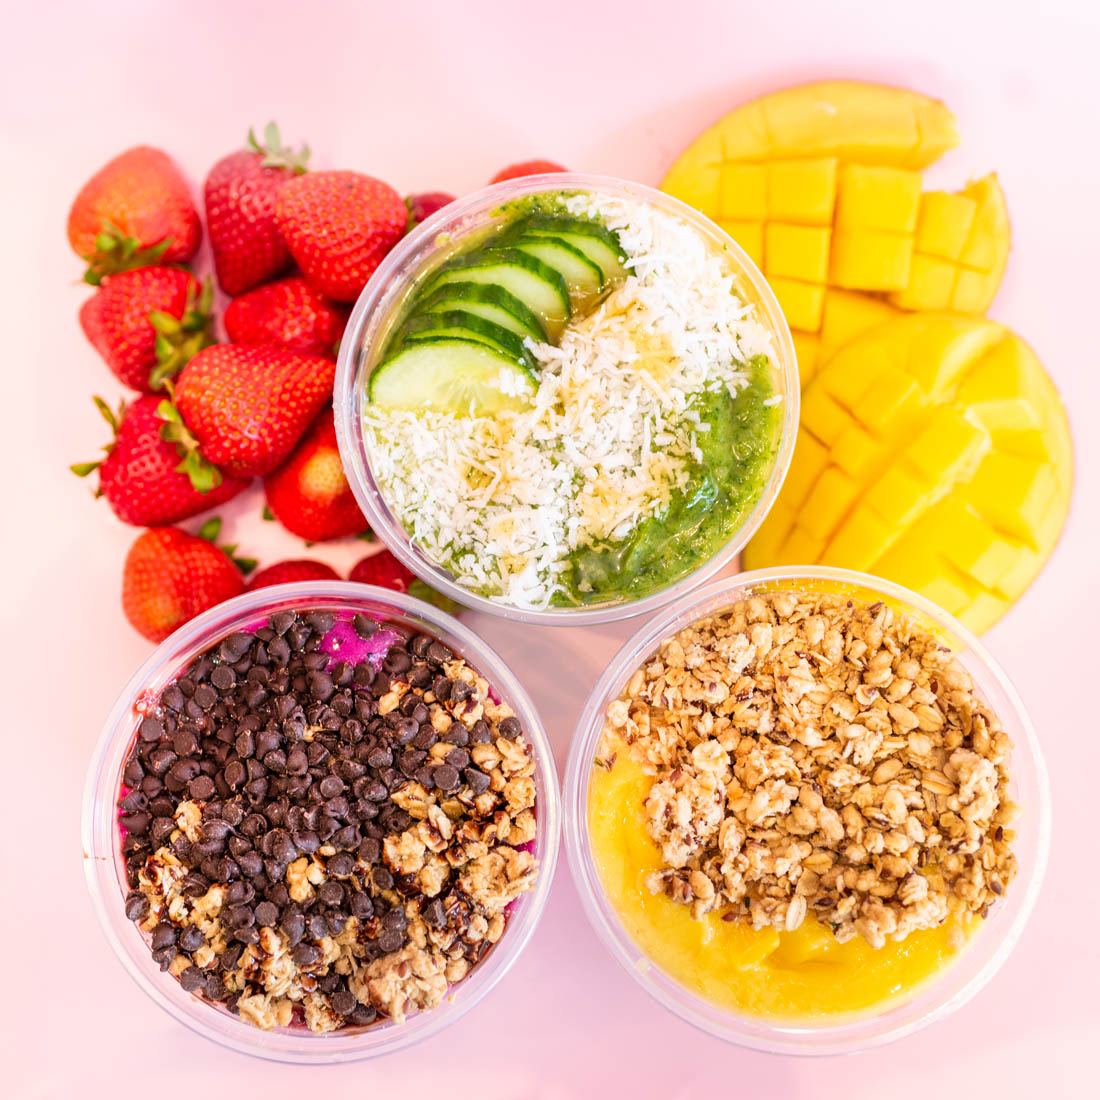 Rush Bowls smoothie bowls nutrition info in Albuquerque, NM.